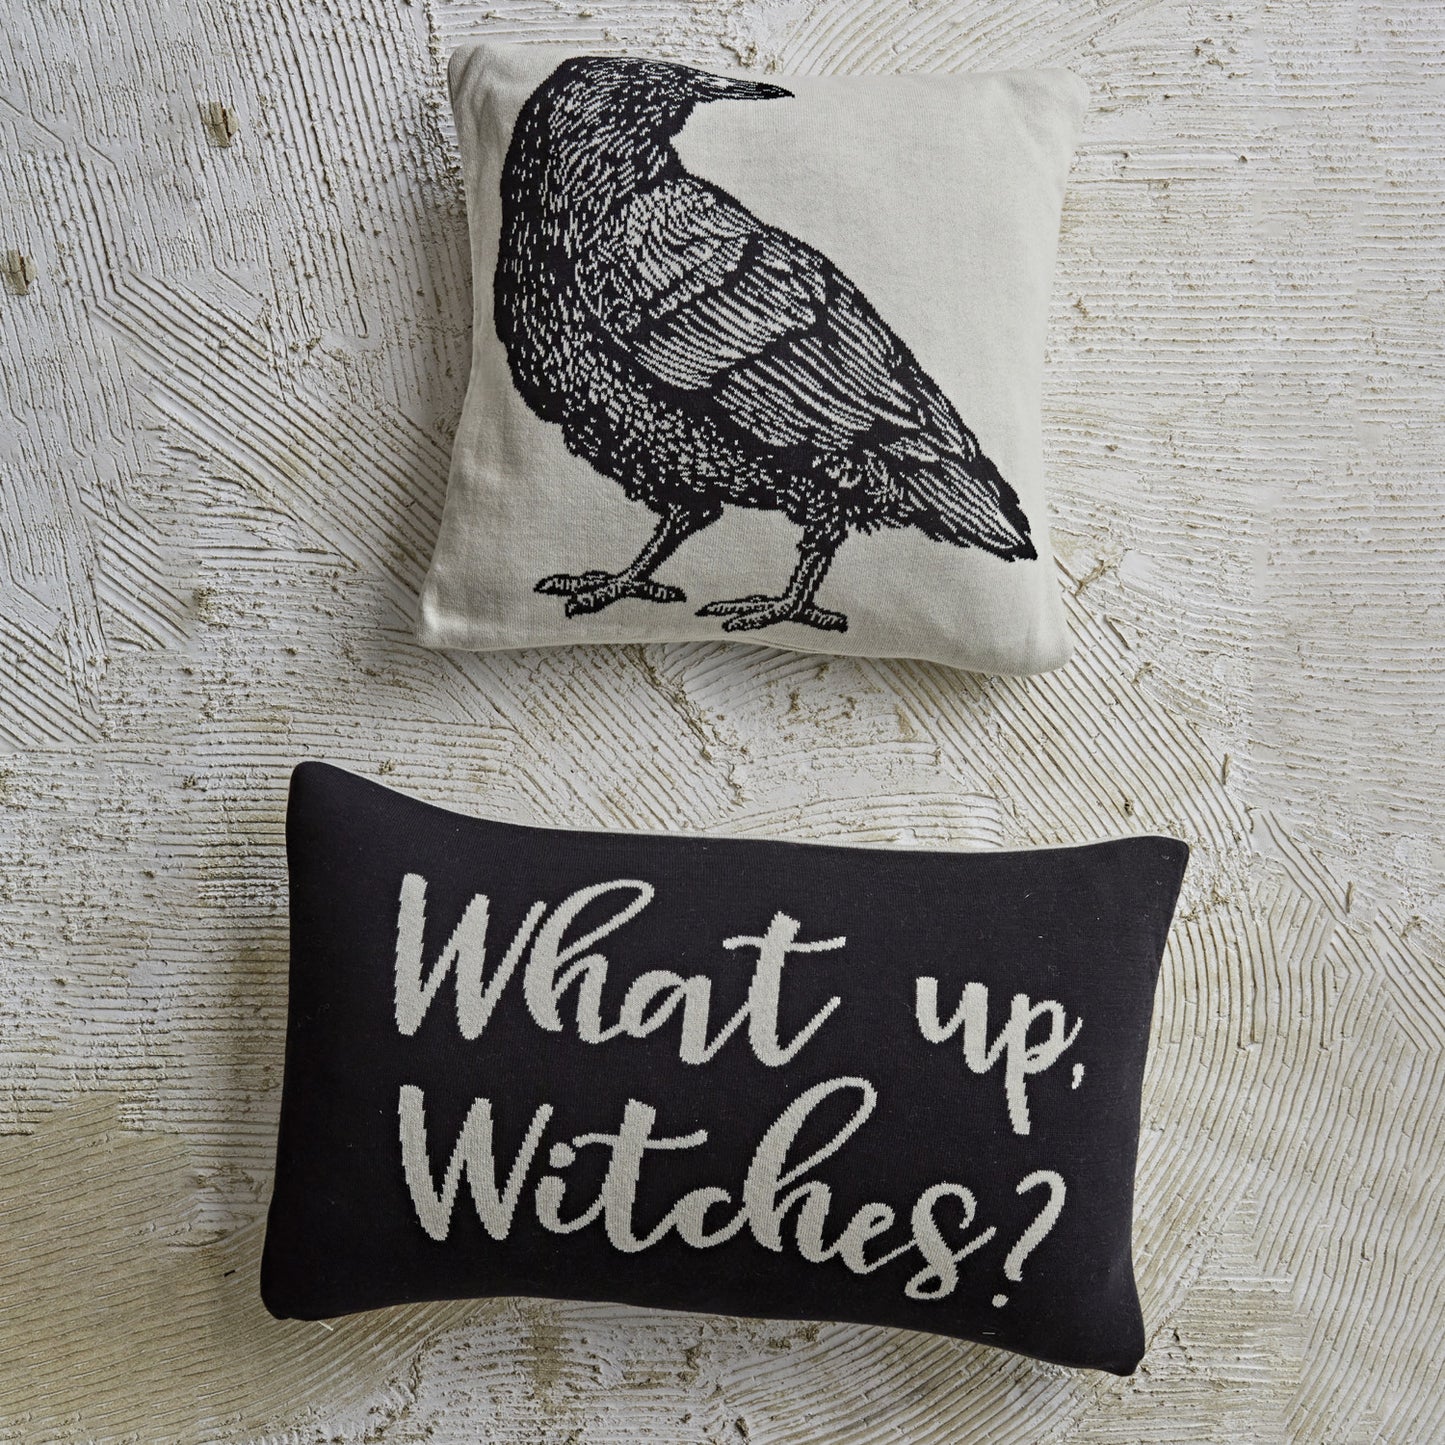 "What up, Witches?" 24" x 16" Two-Sided Cotton Knit Pillow